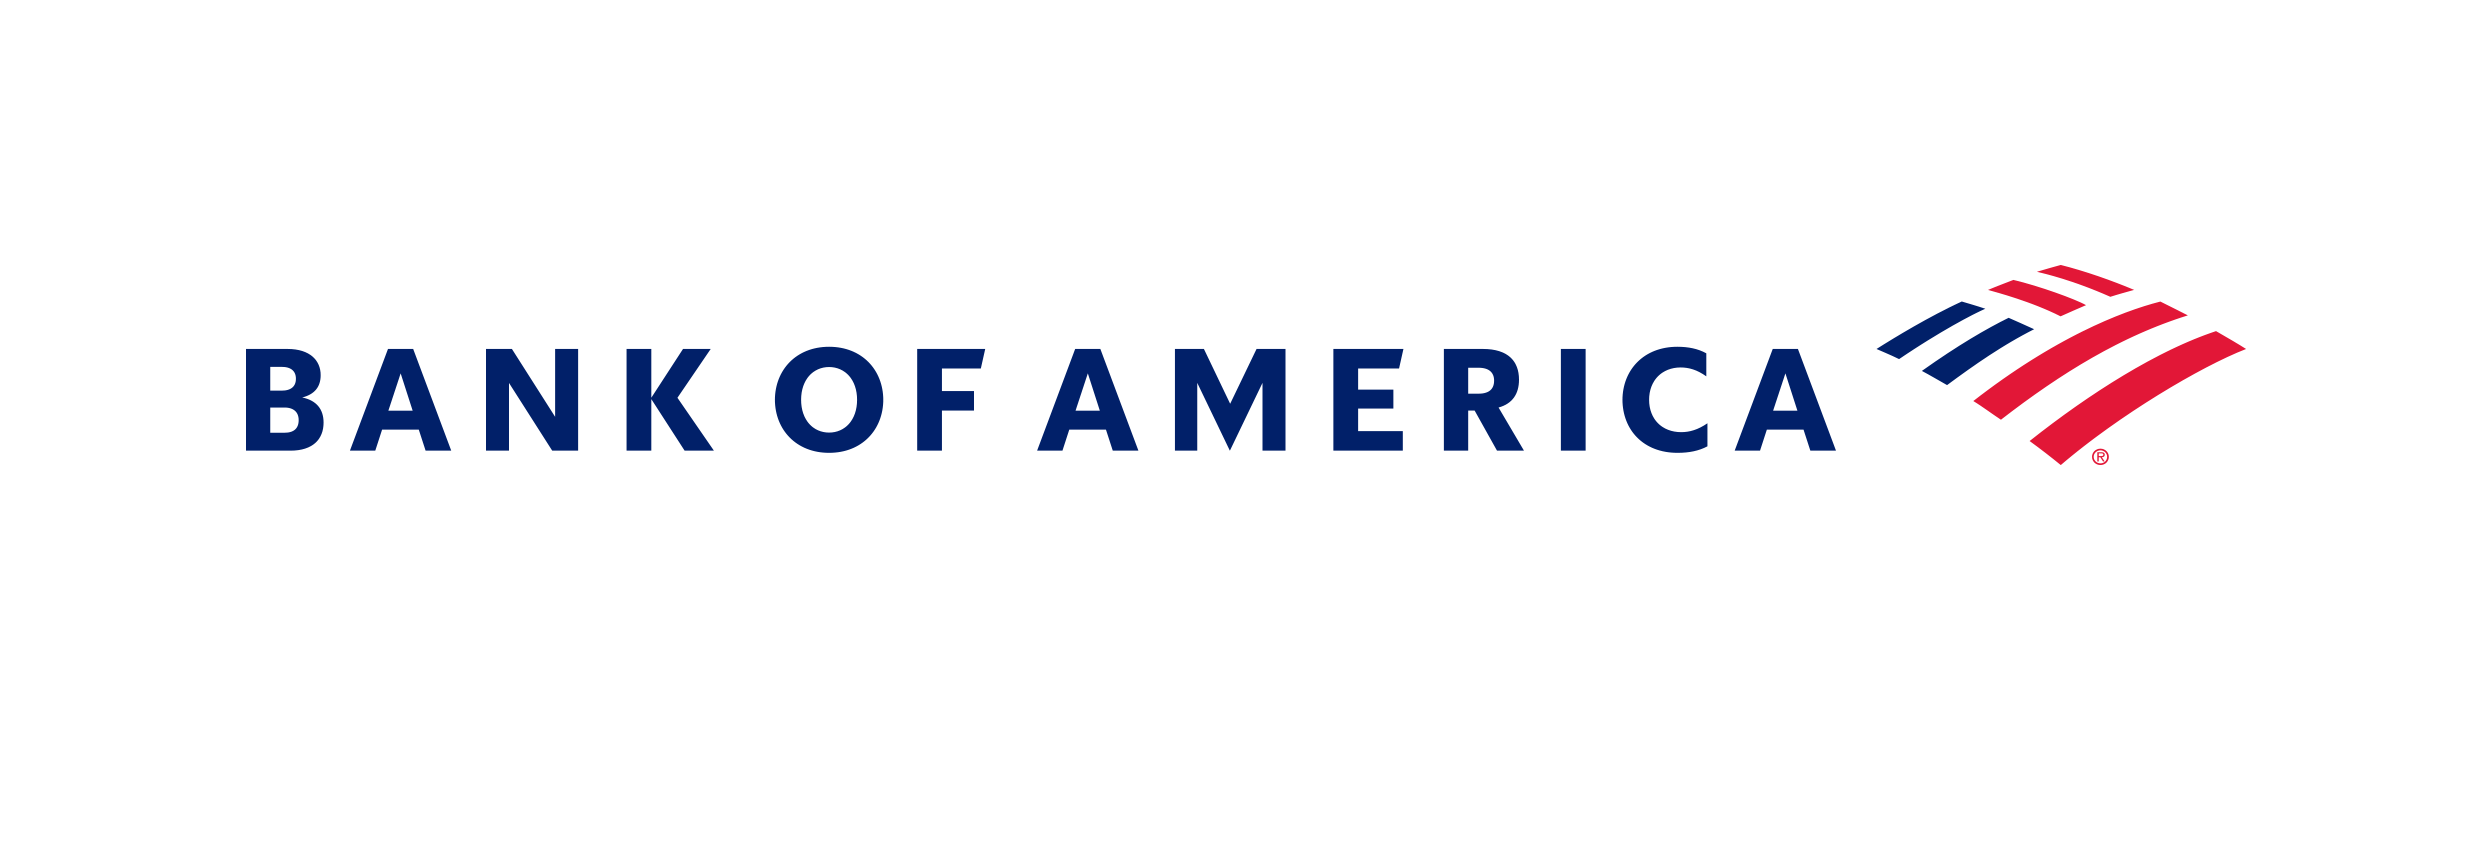 Bank of America Joins POUA Housing & Health Initiative 